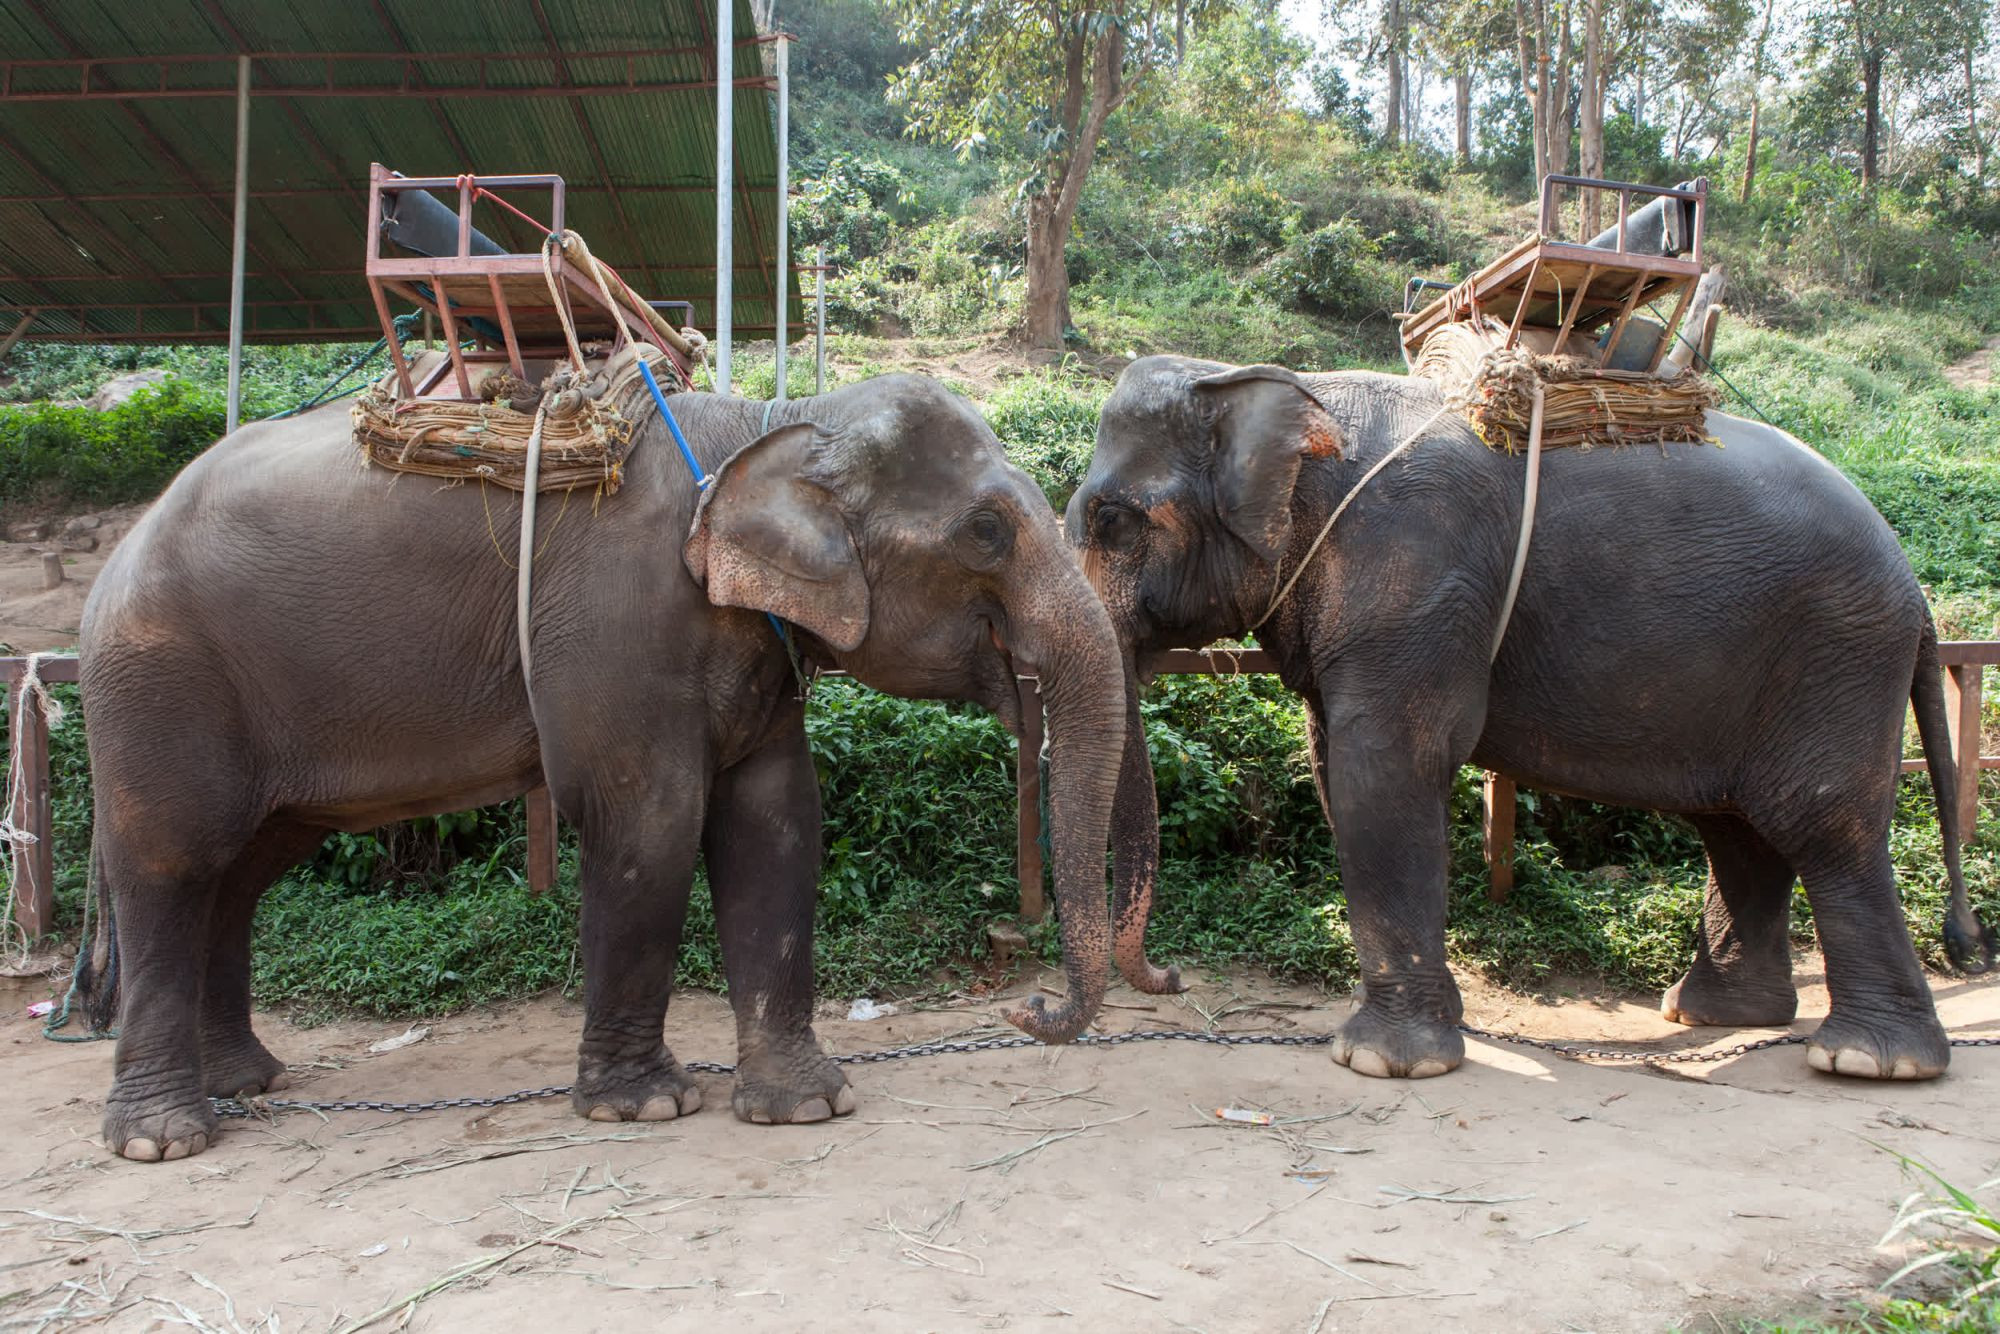 Elephants facing each other with saddles on their backs at a tourist attraction - Unite for the herd - World Animal Protection